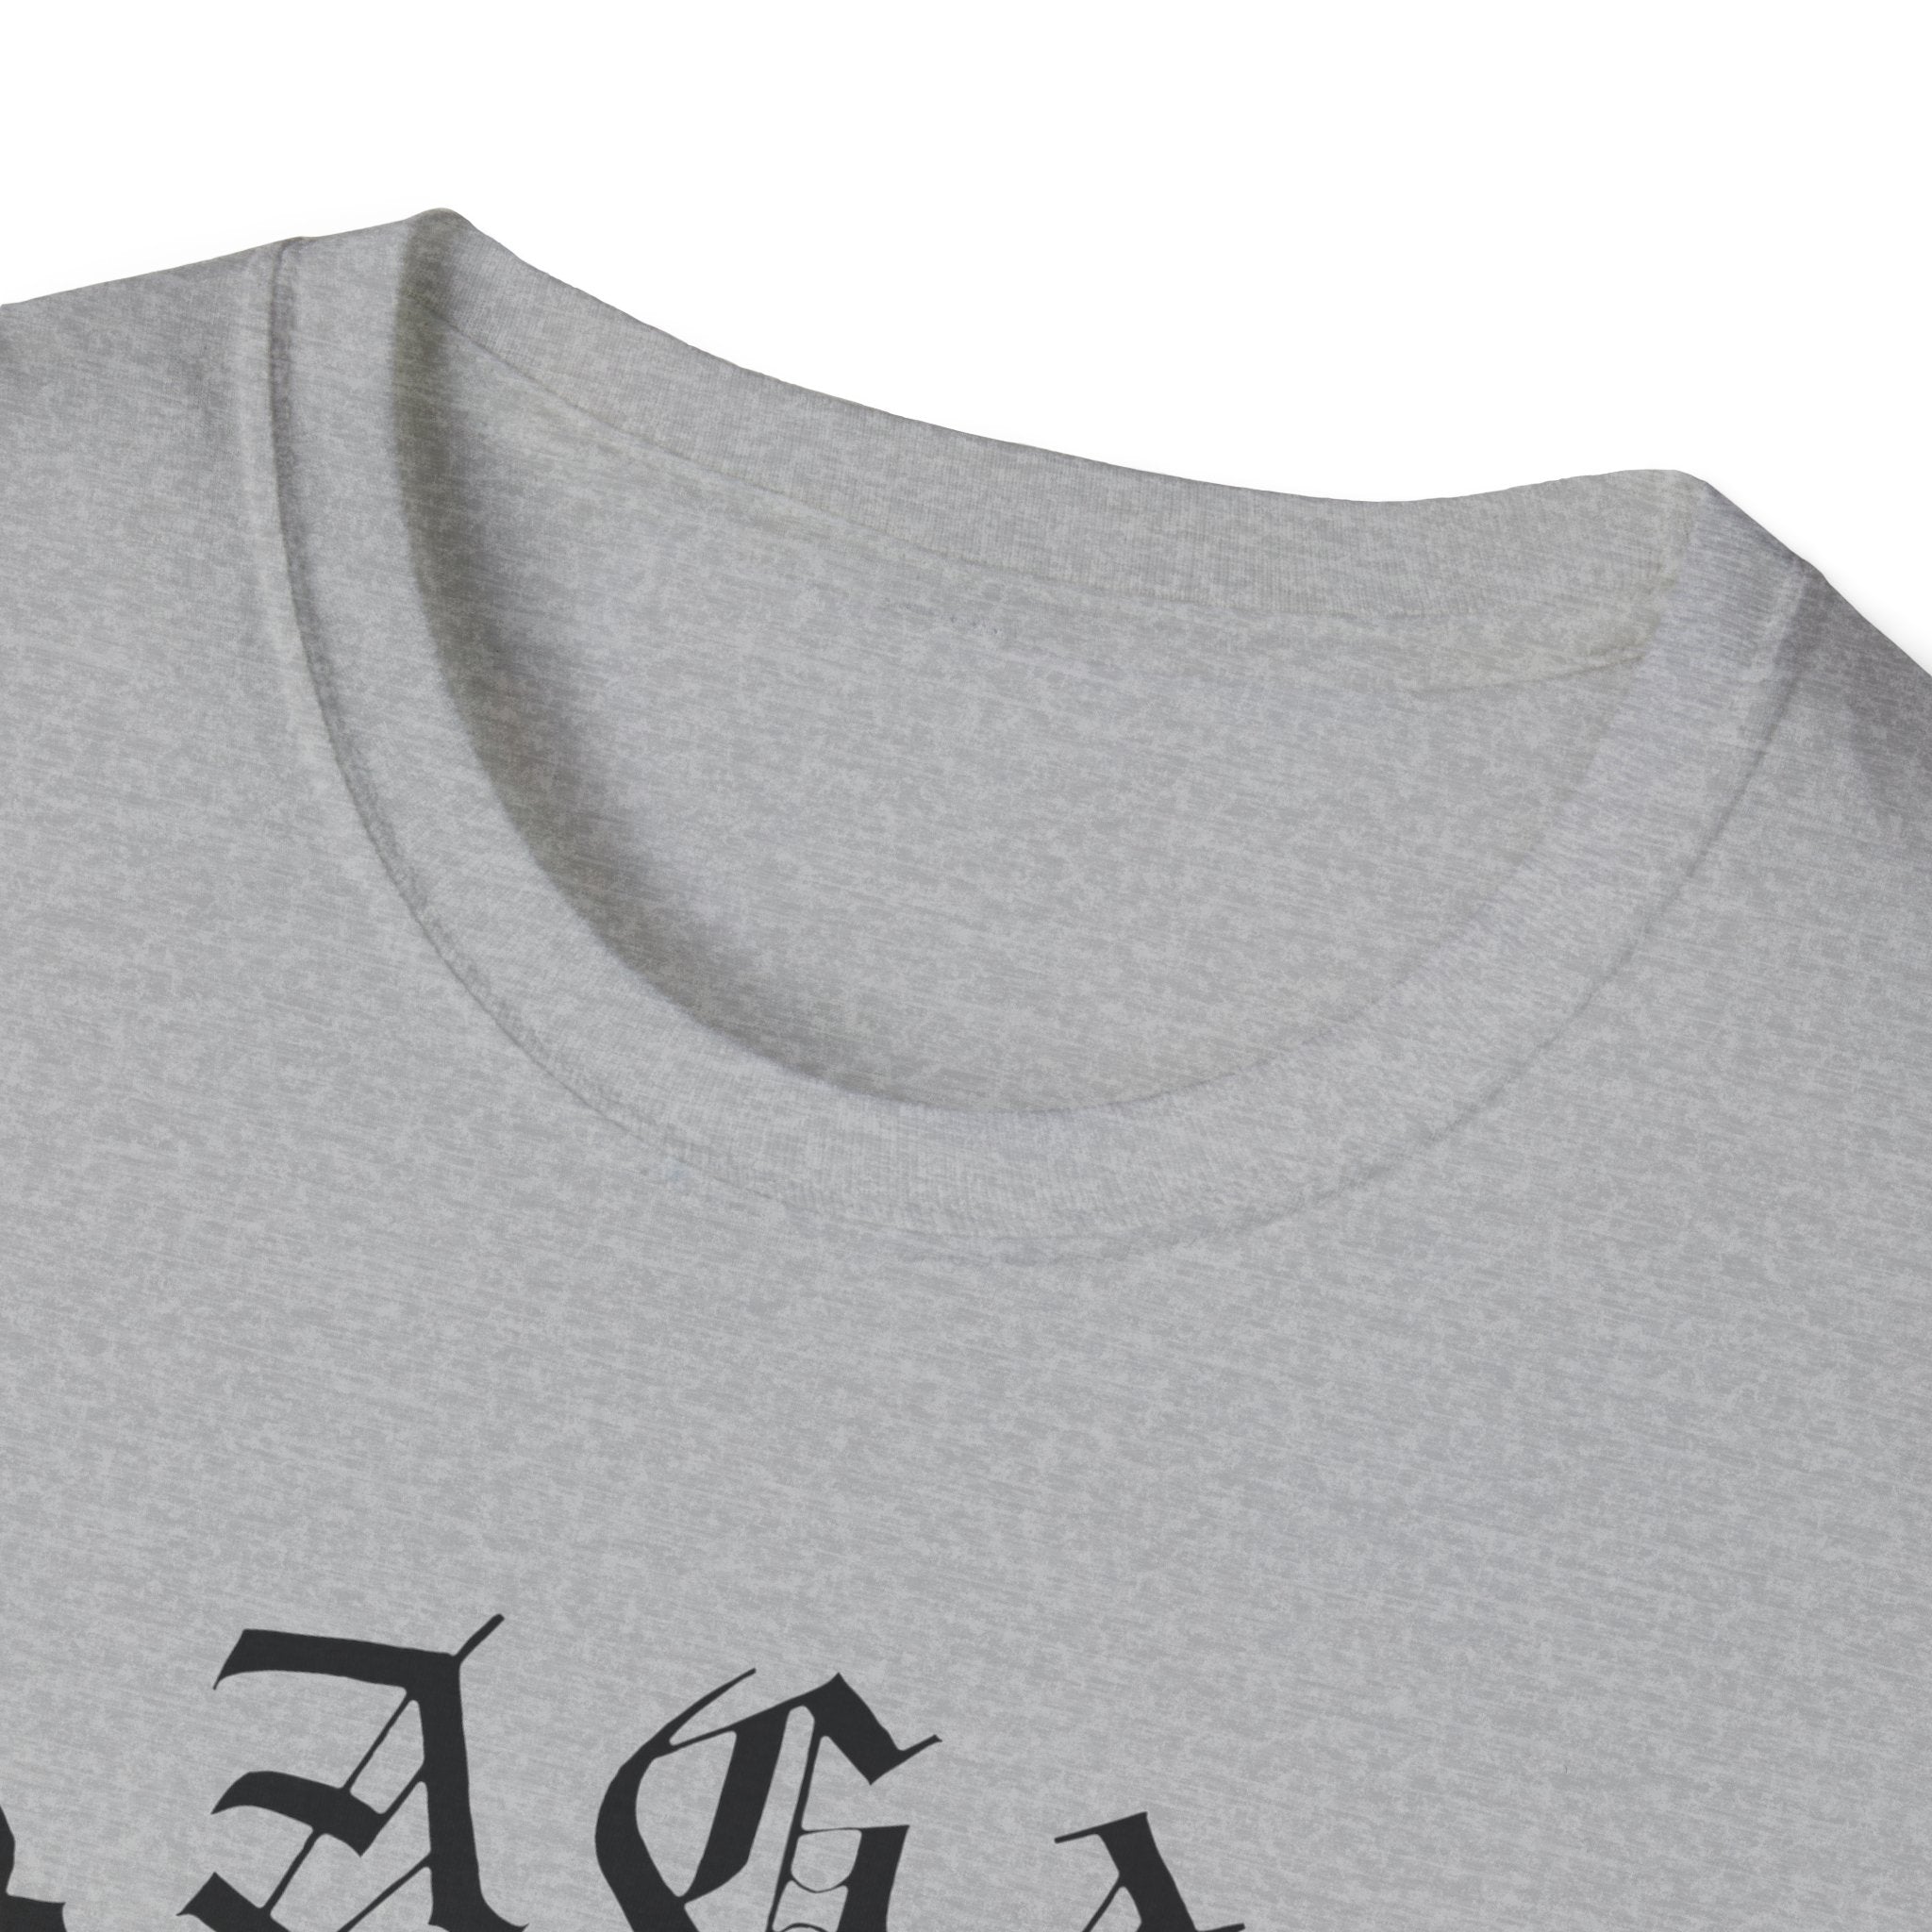 A soft and relaxed fit grey t-shirt with the word Skater Angel on it.